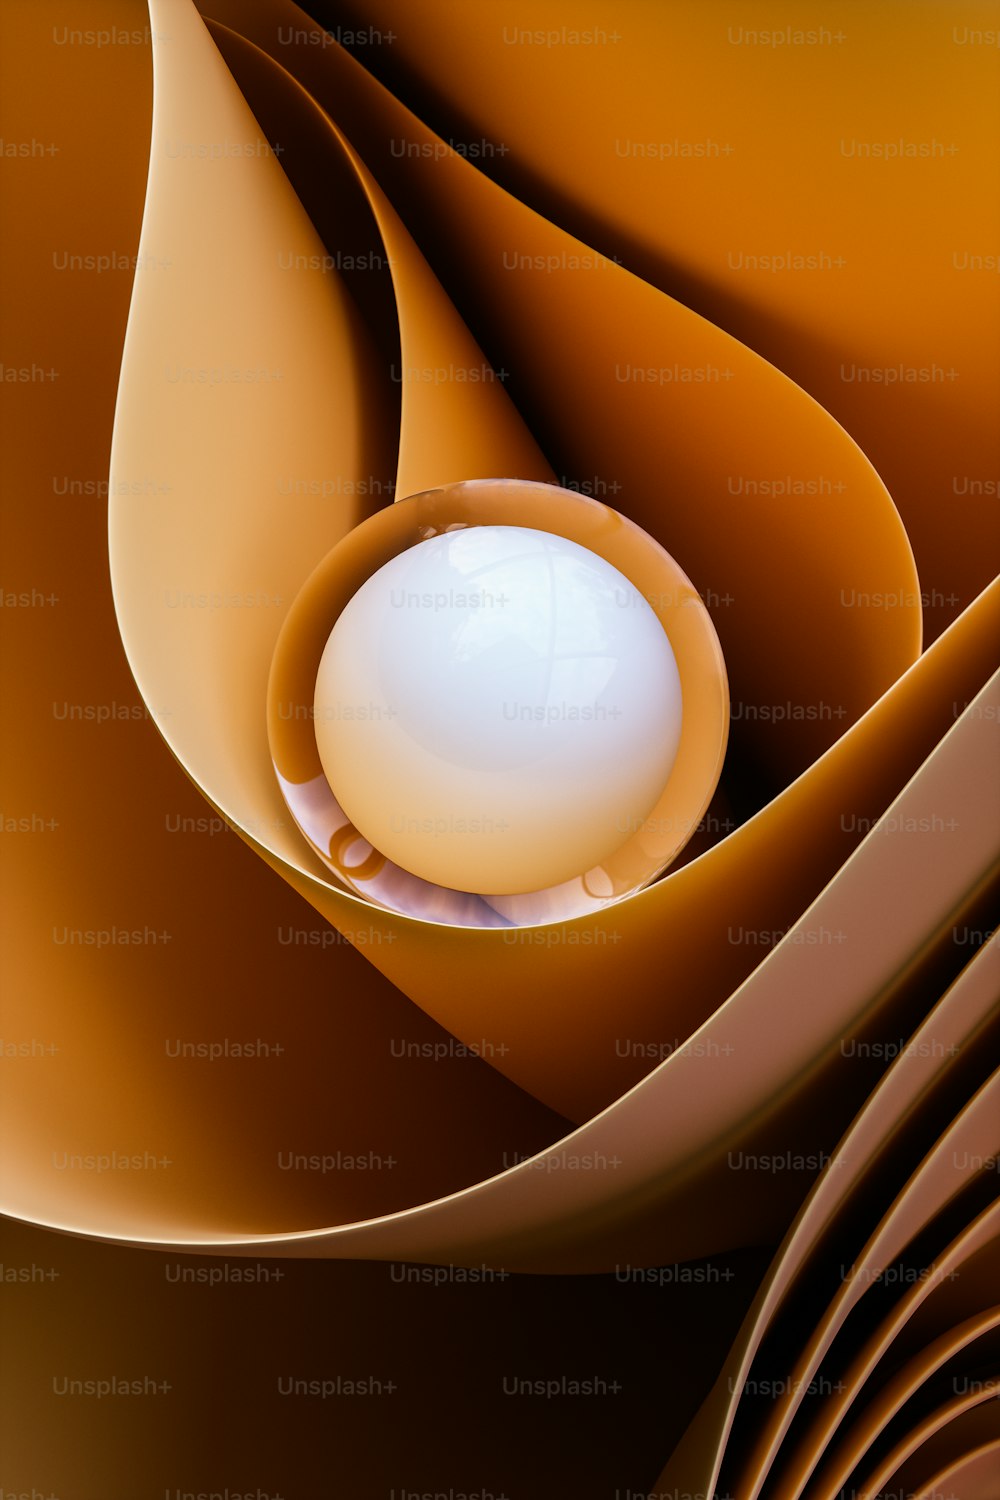 a computer generated image of a sphere in the center of a swirl